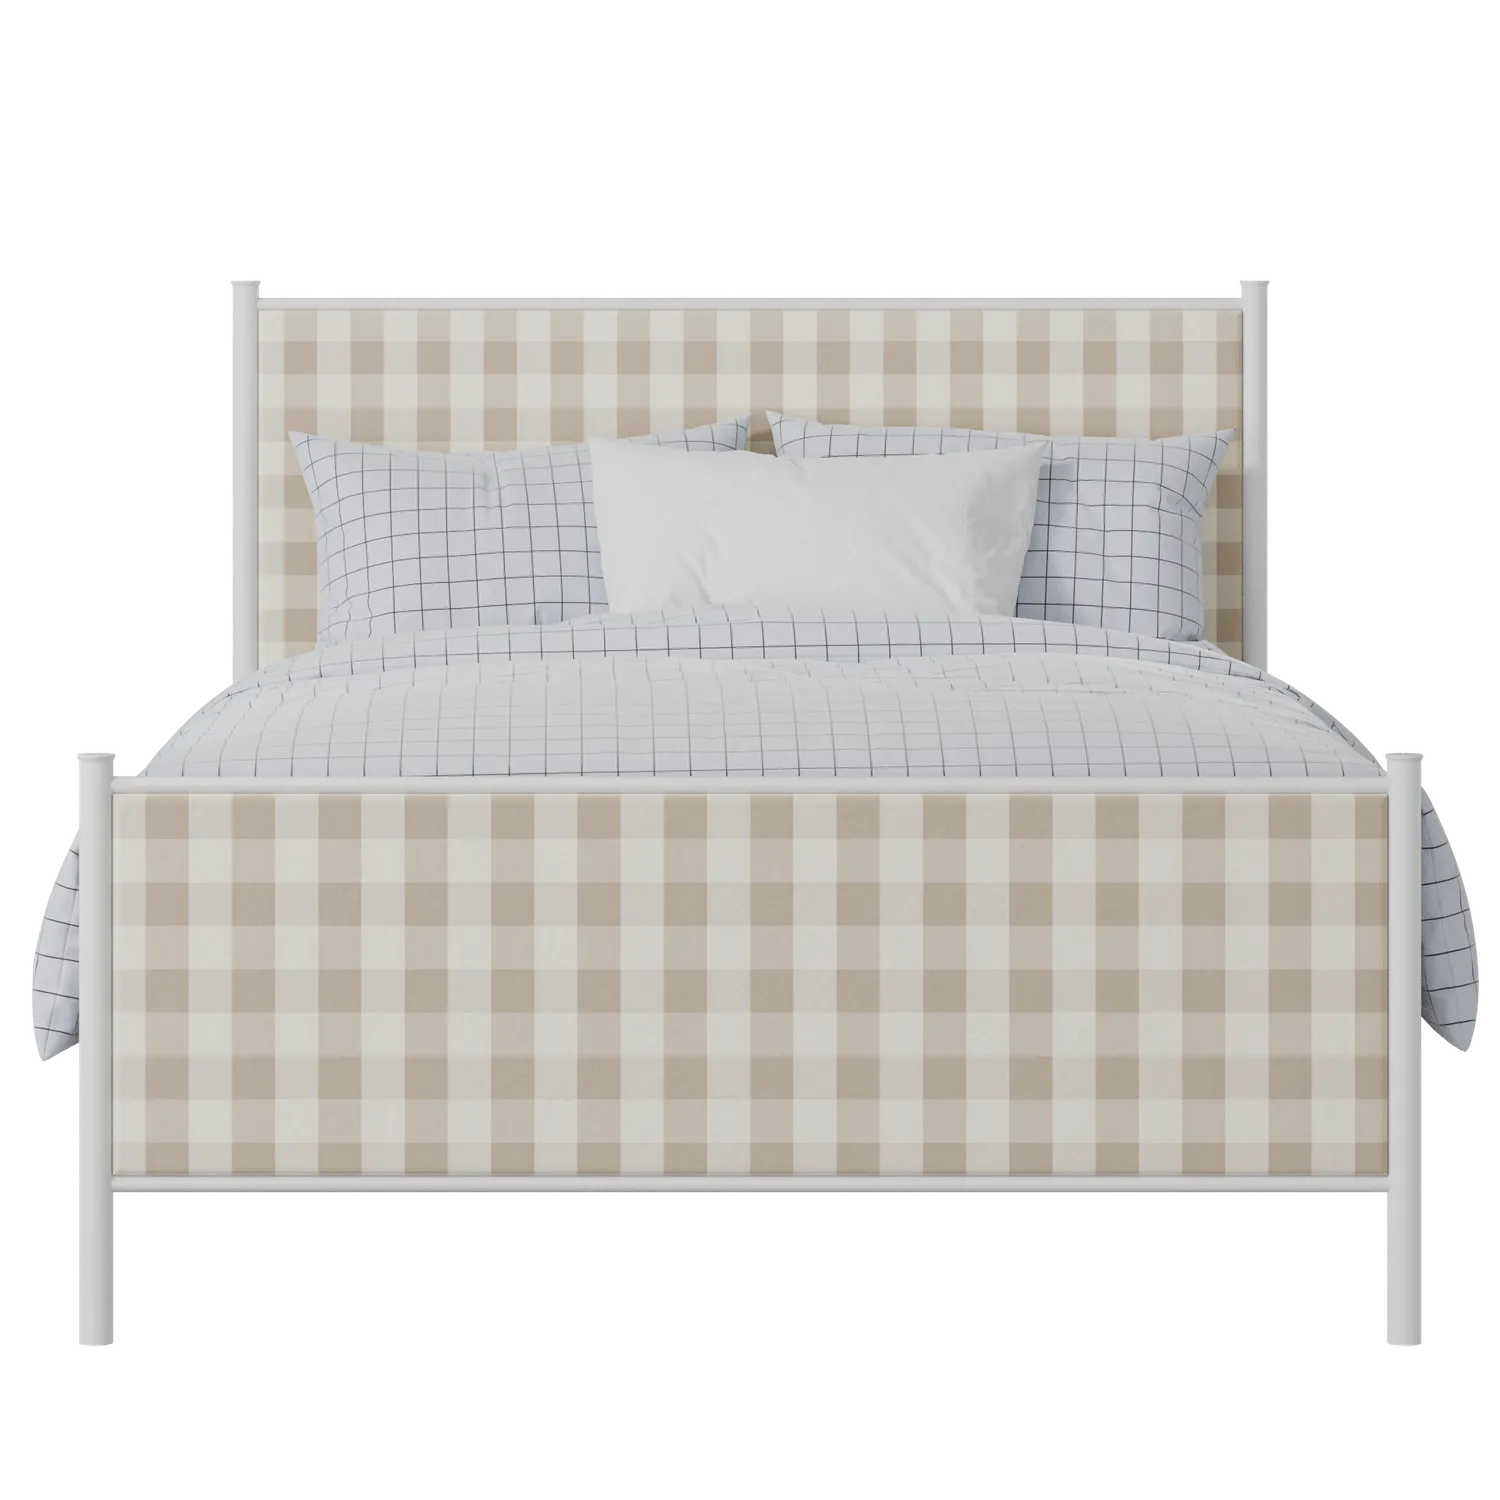 Brest iron/metal upholstered bed in white with grey fabric